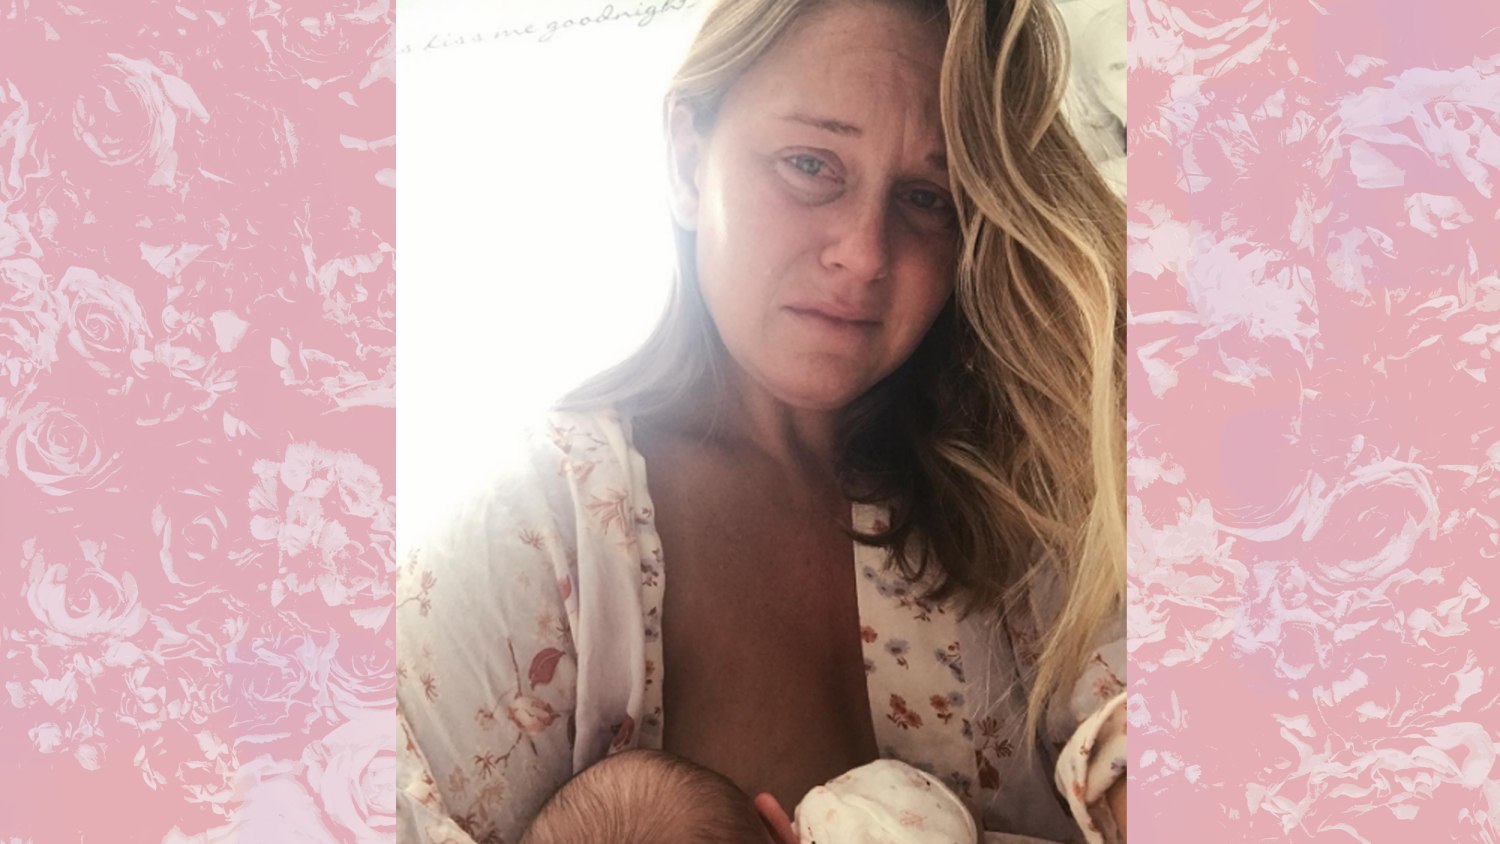 Mom gets real about breastfeeding: 'I cannot hide the struggle